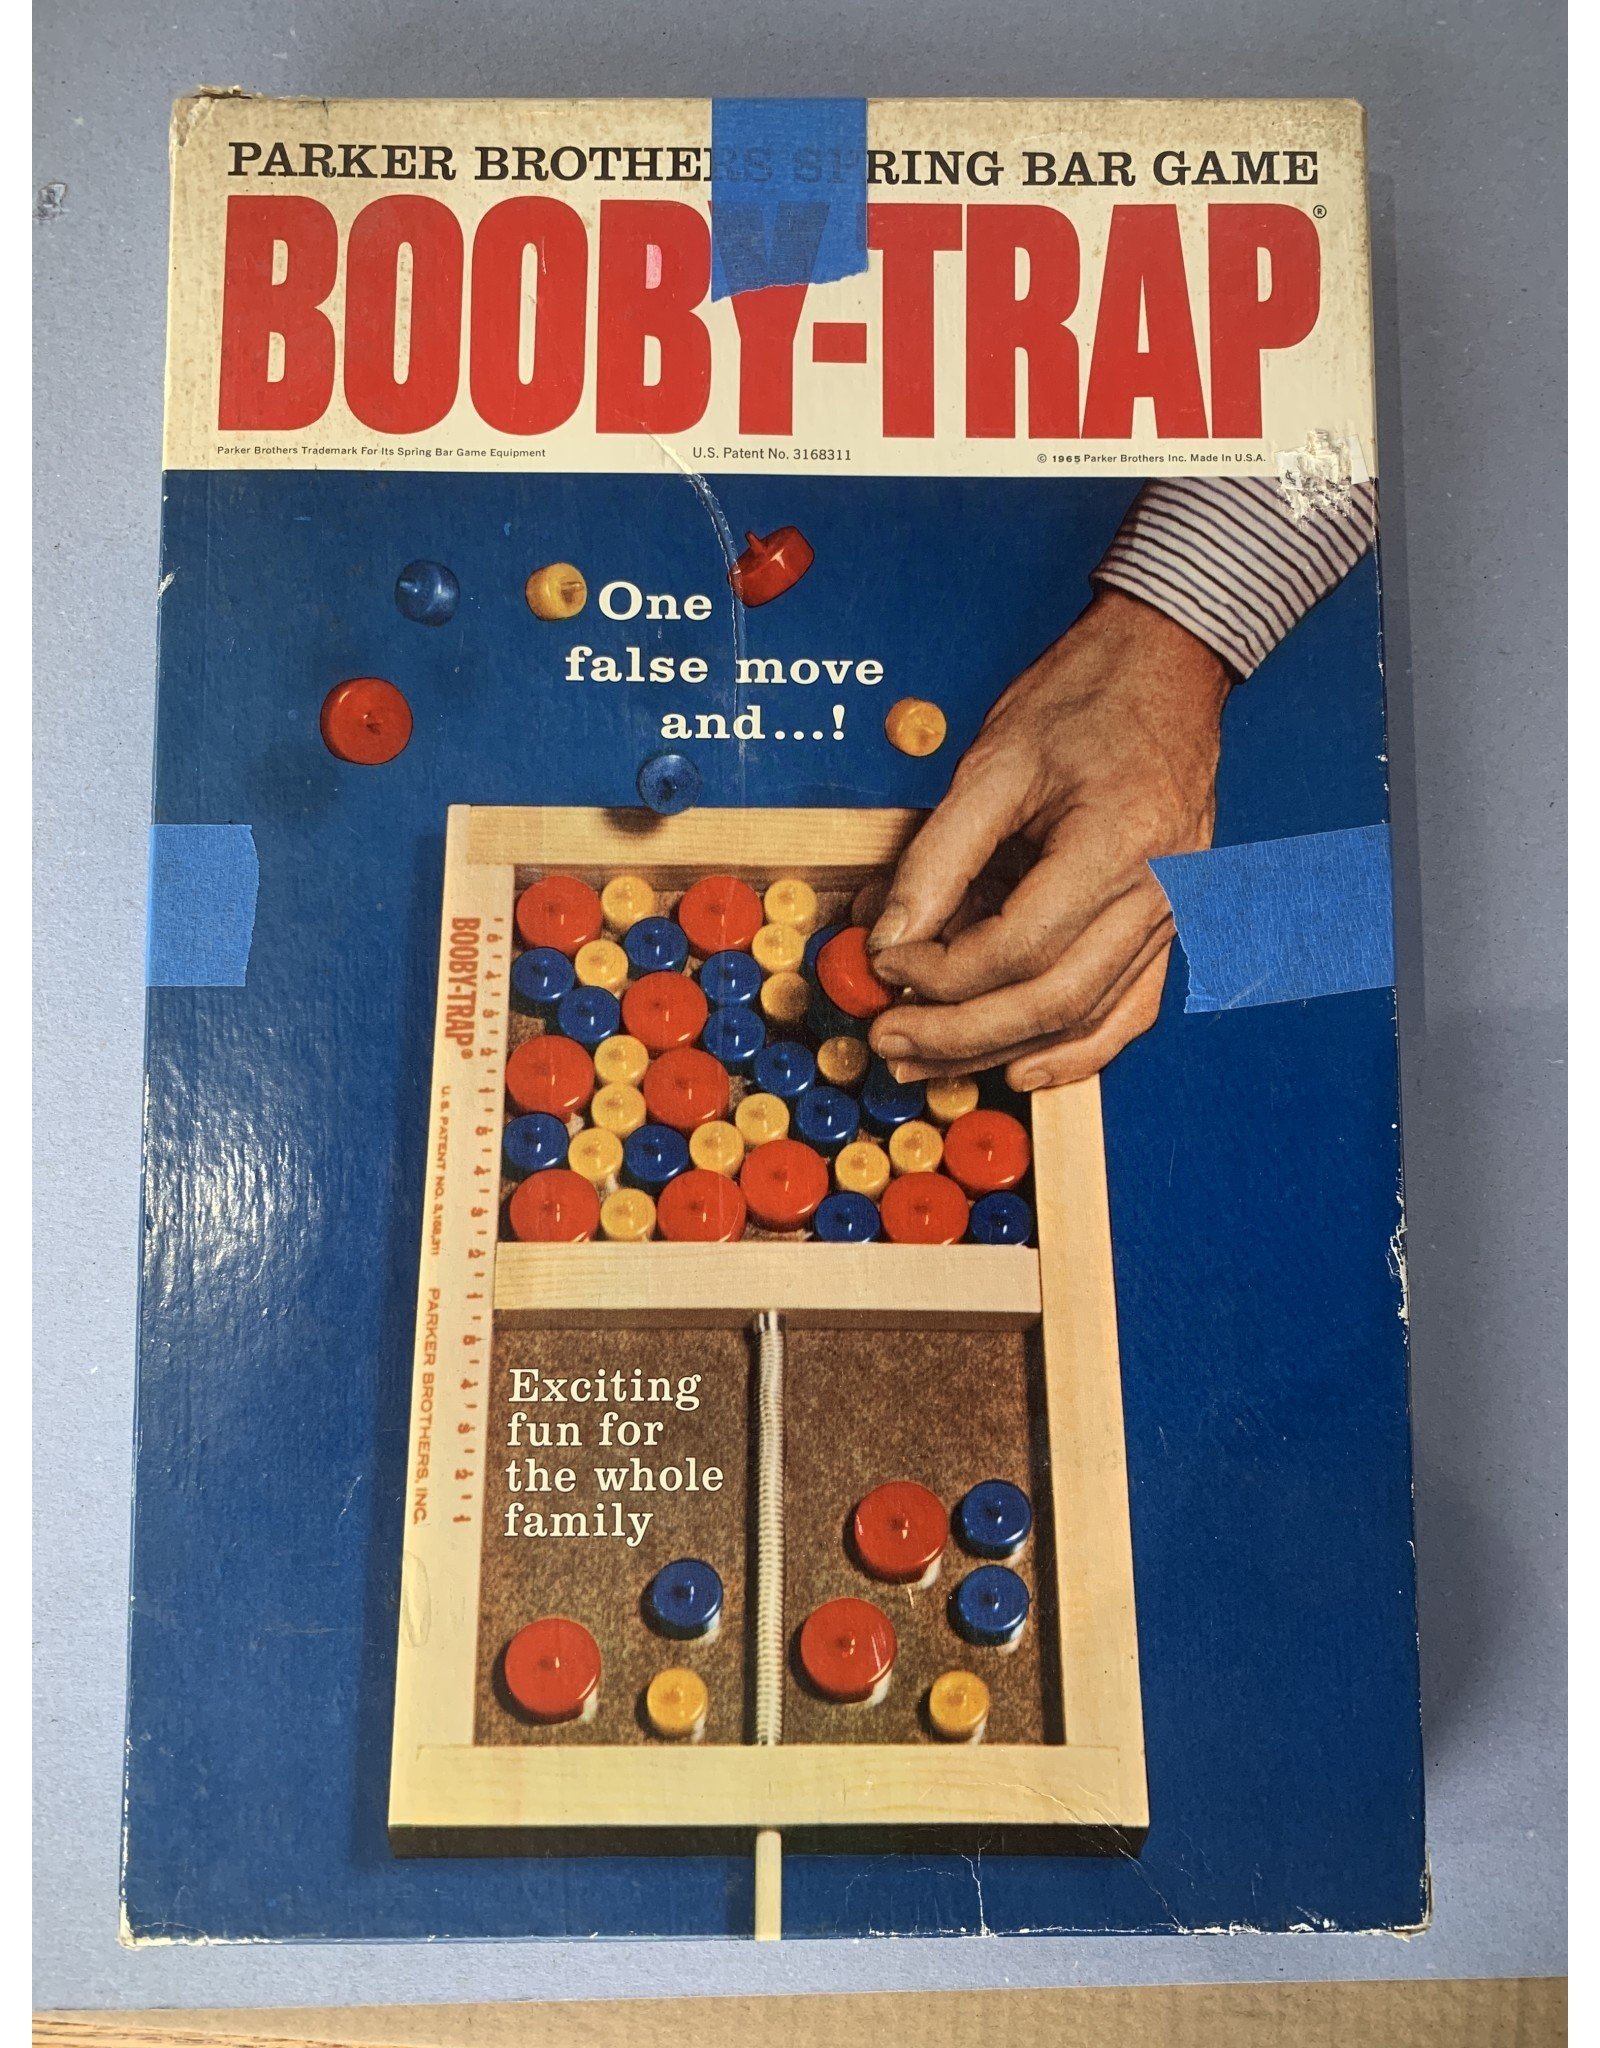 PARKER BROTHERS Booby-Trap 1965 Edition